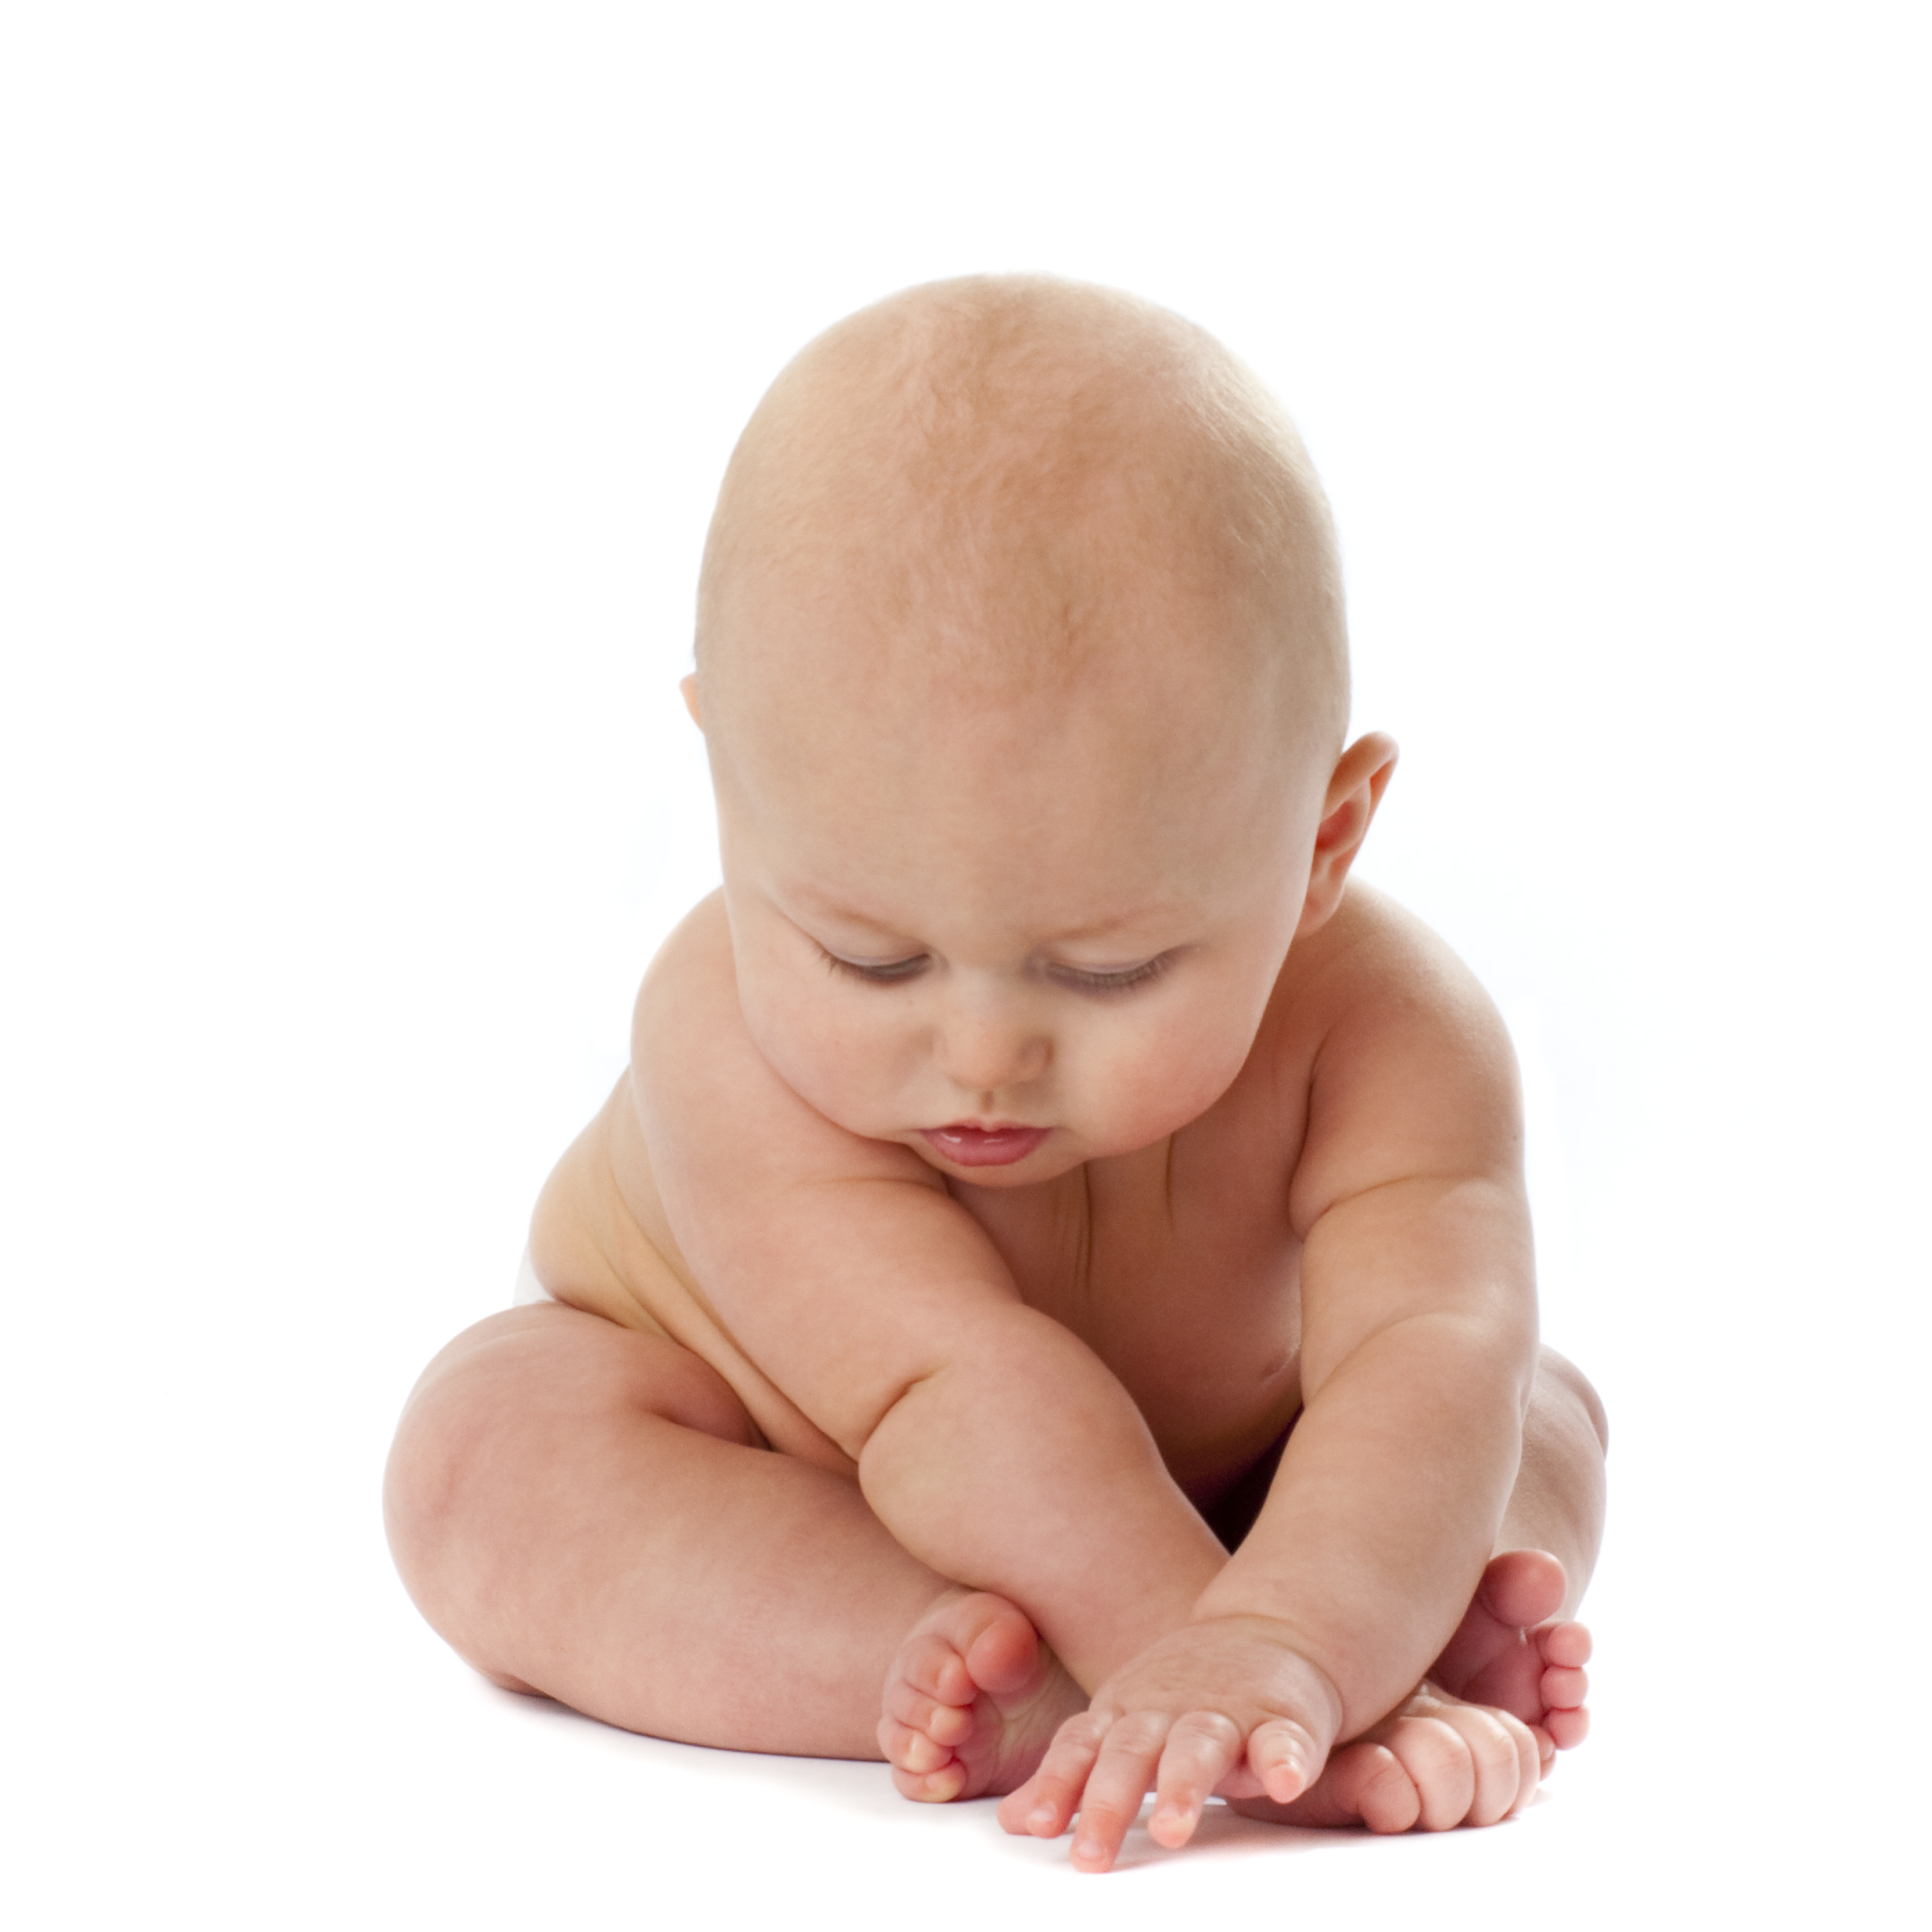 Chubby naked baby braced on legs and arms and leaning forward